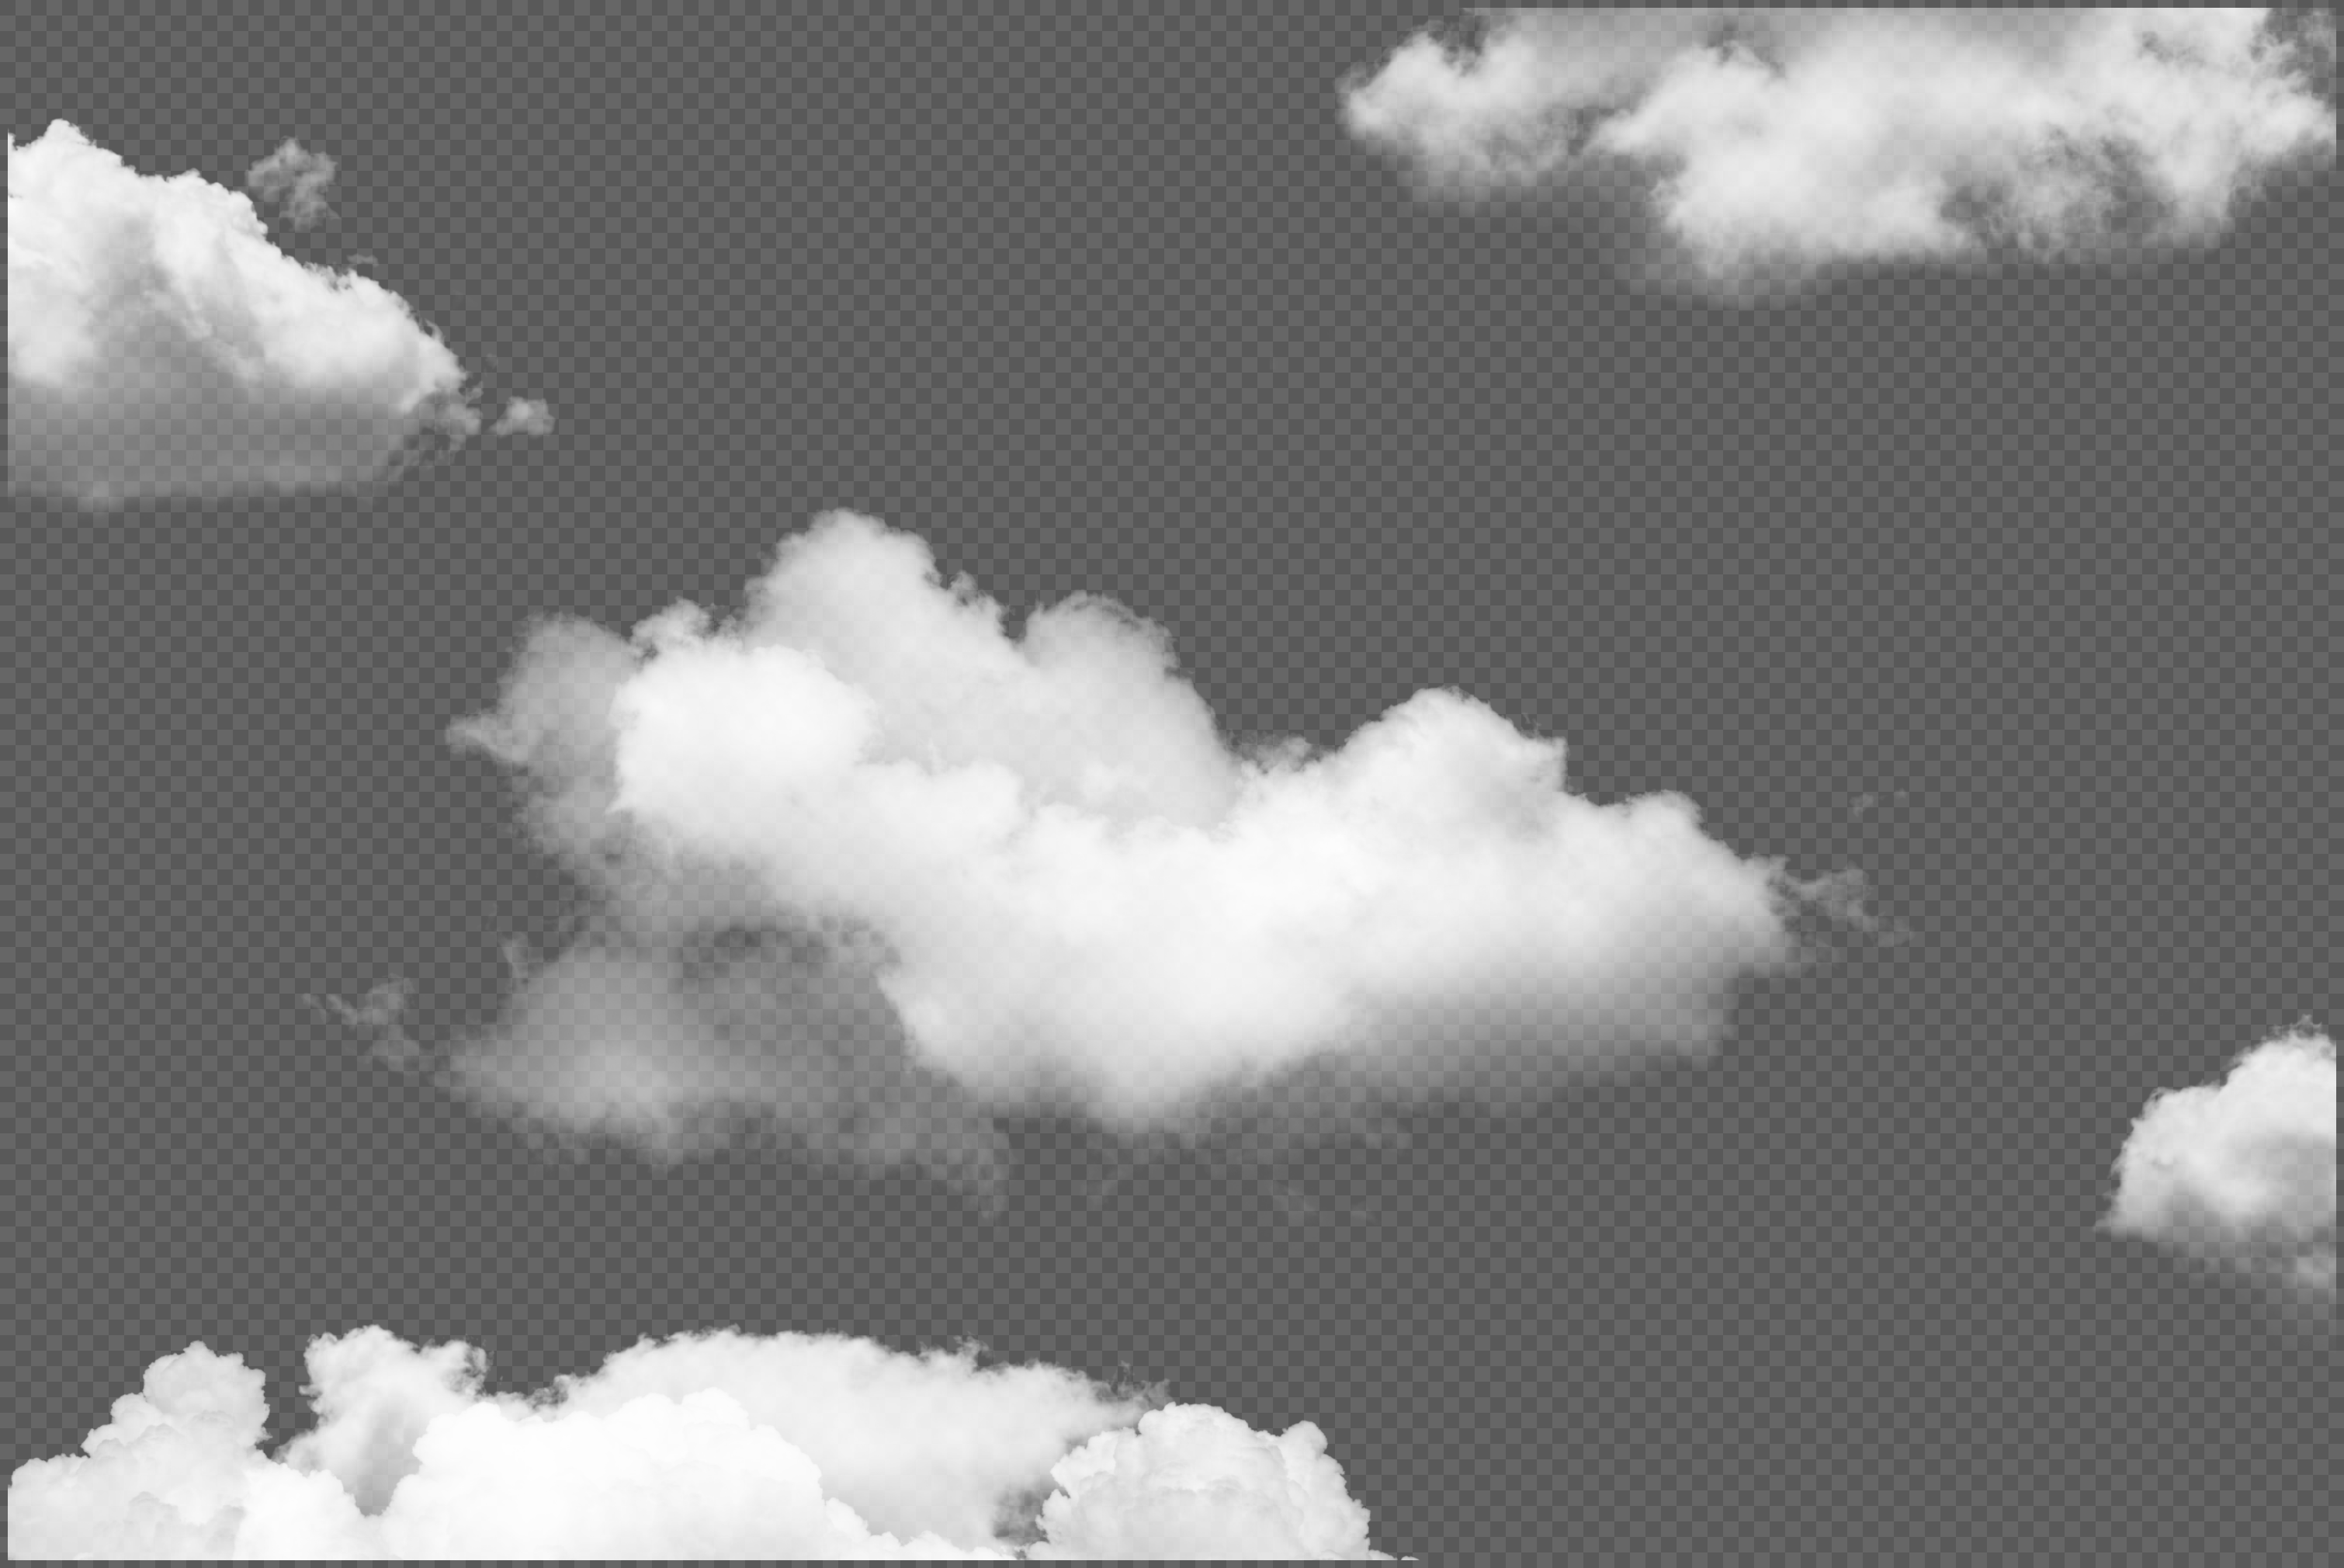 Cloud Images  Free HD Backgrounds, PNGs, Vectors & Templates